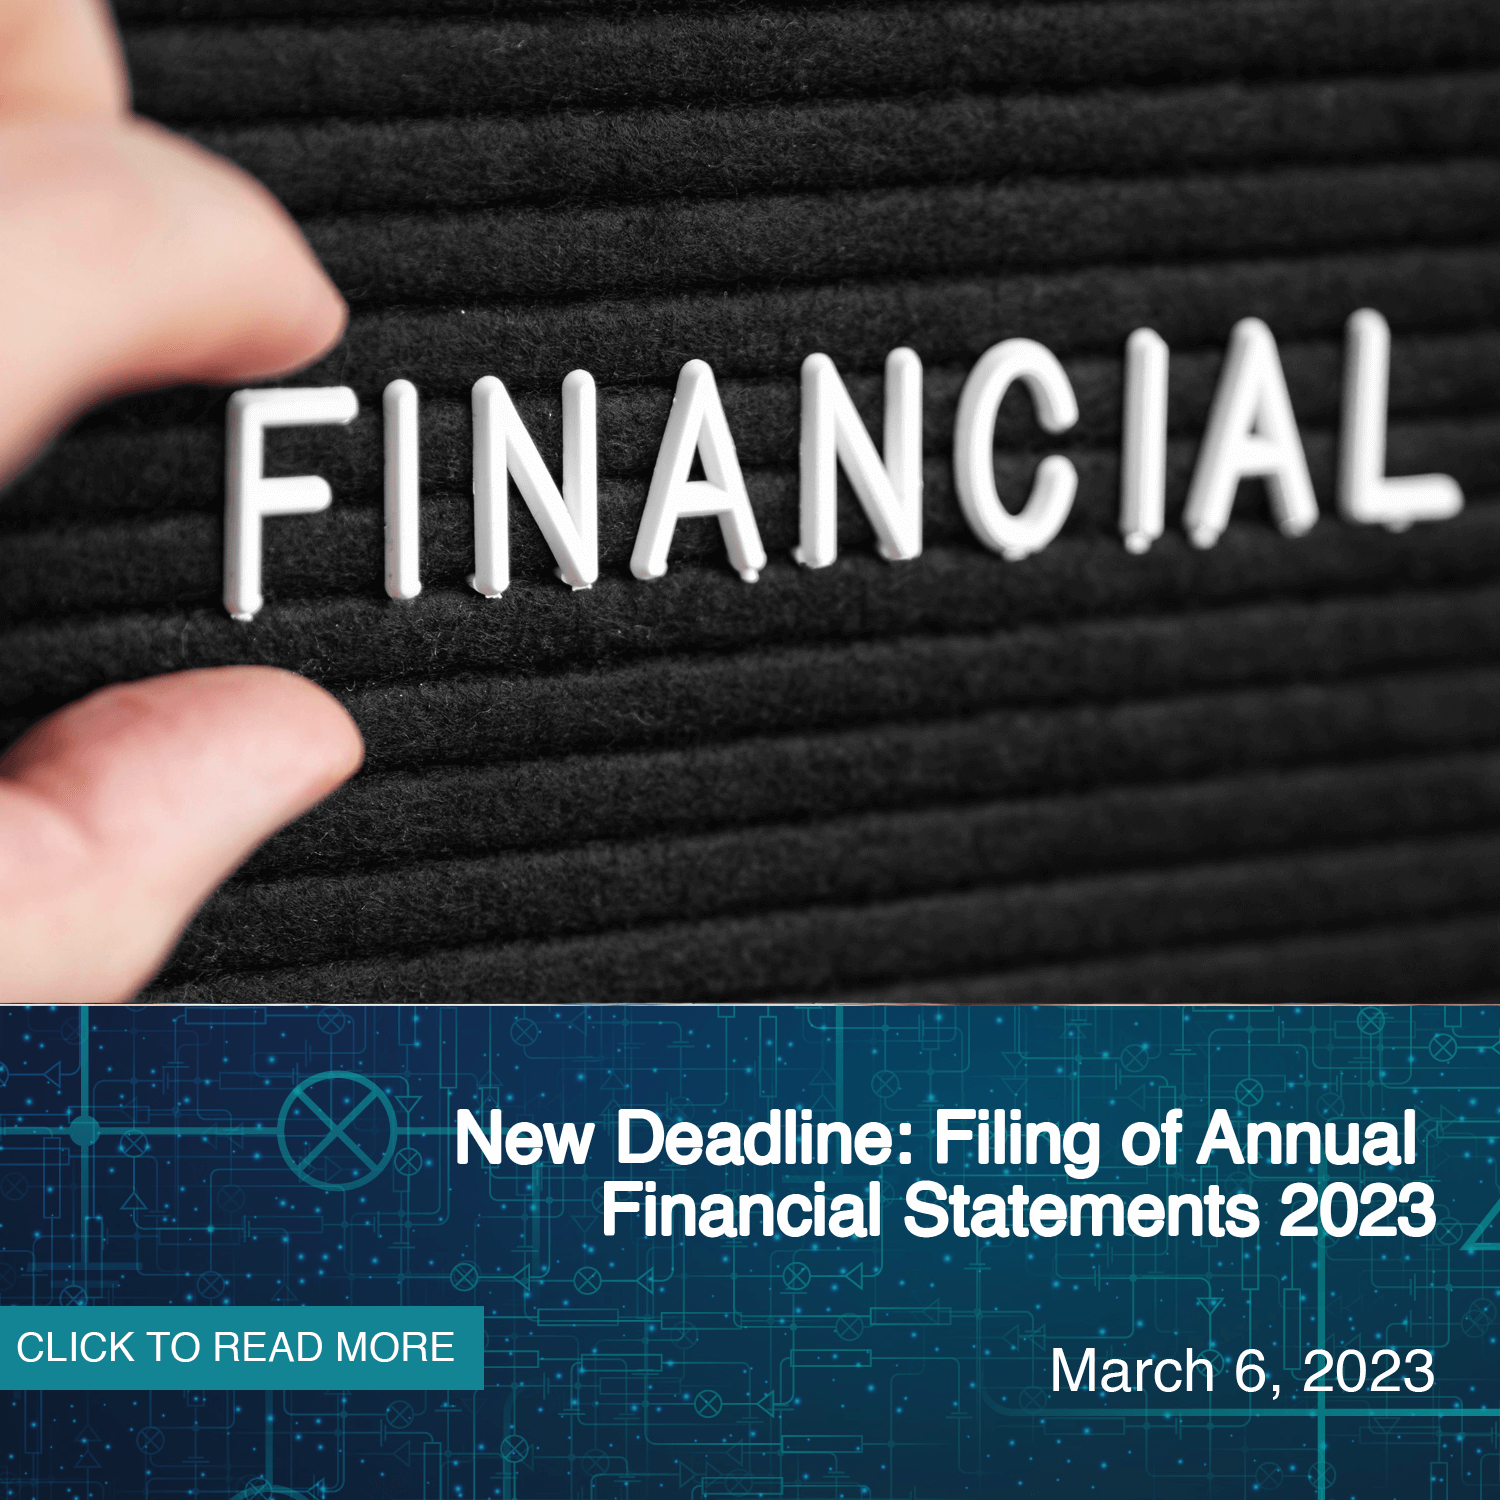 New Deadline: Filing of Annual Financial Statements 2023